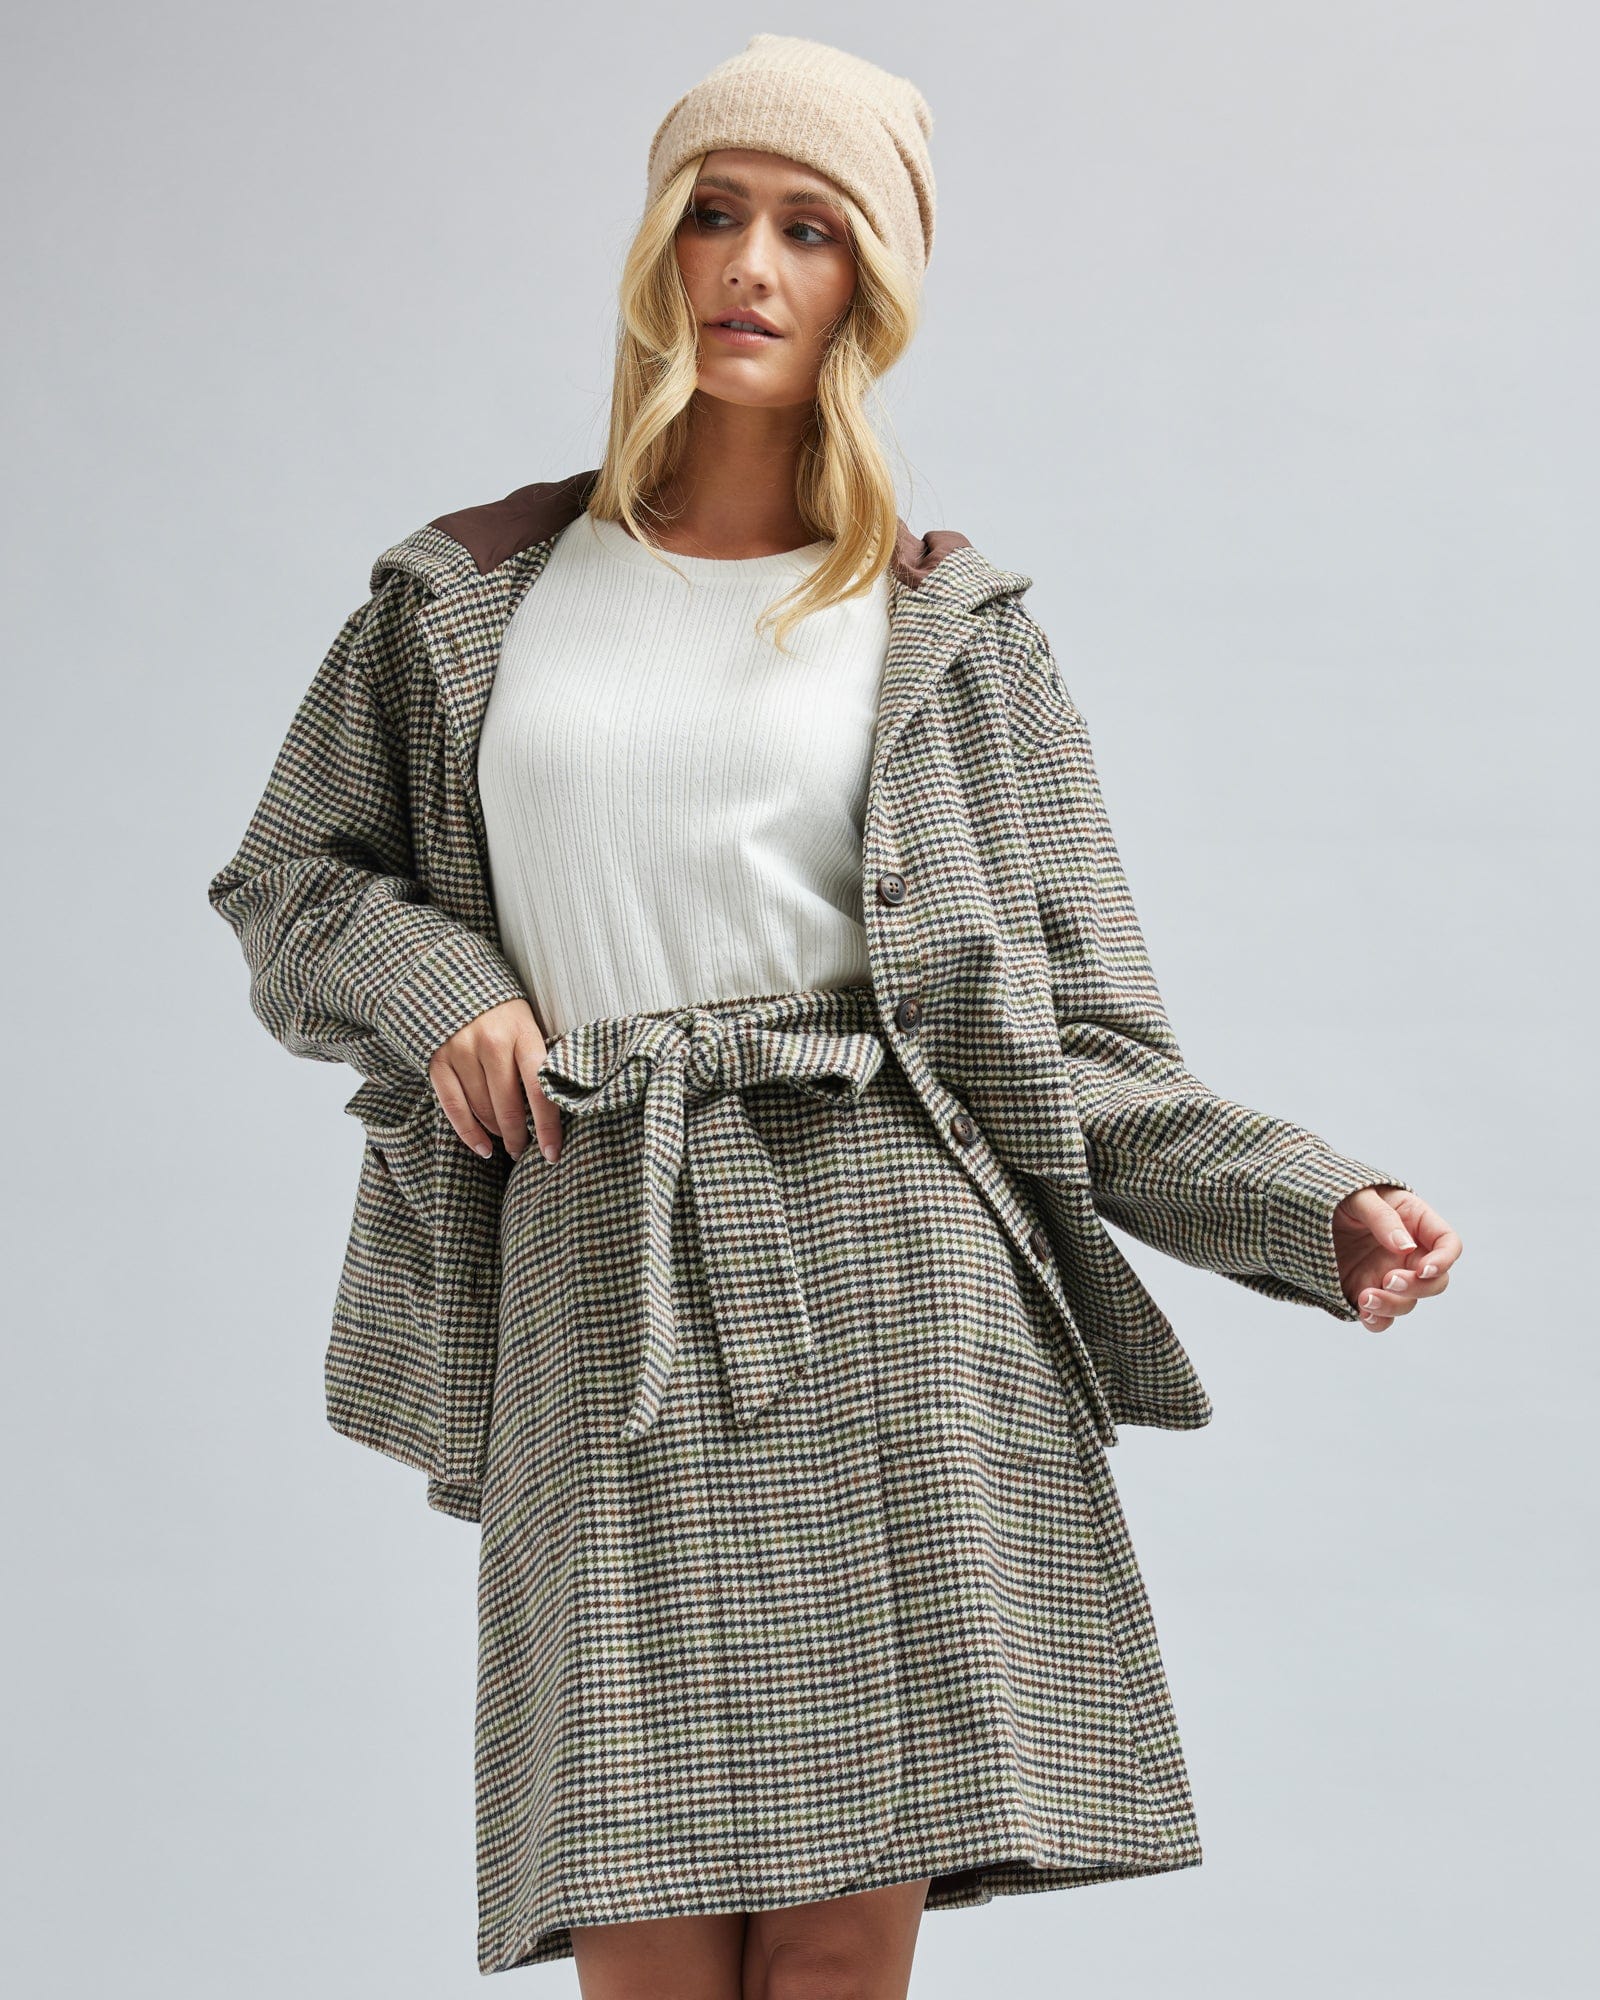 Woman in an oversized, long sleeve, plaid jacket